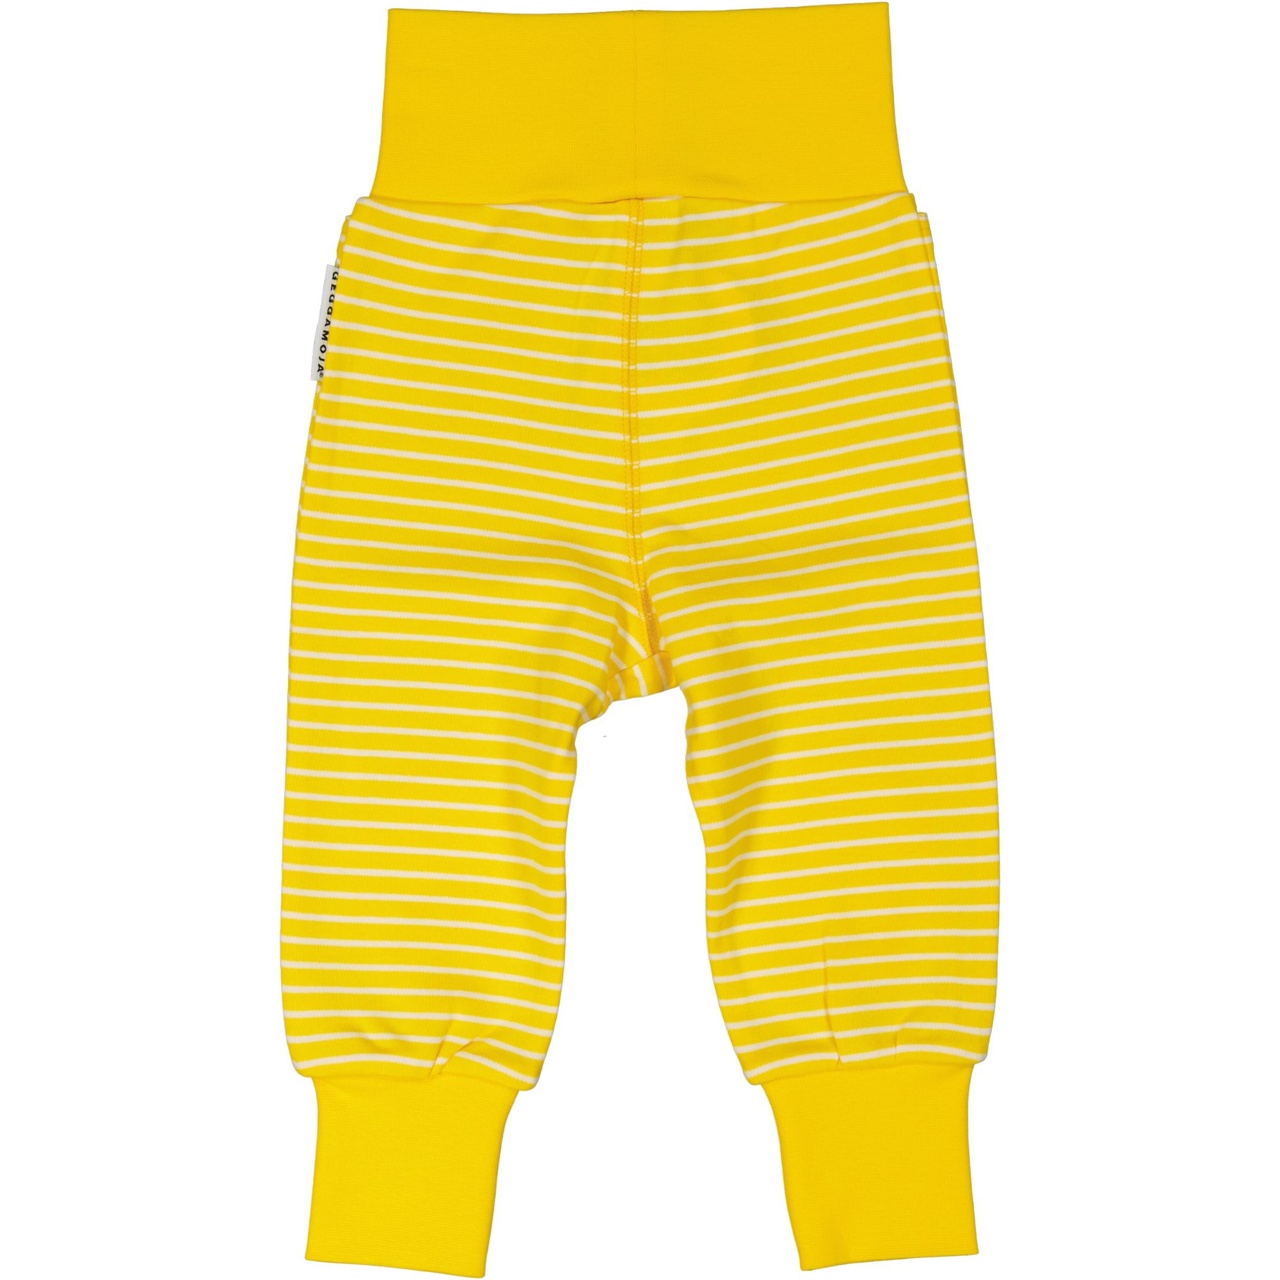 Baby trousers Yellow/white  74/80